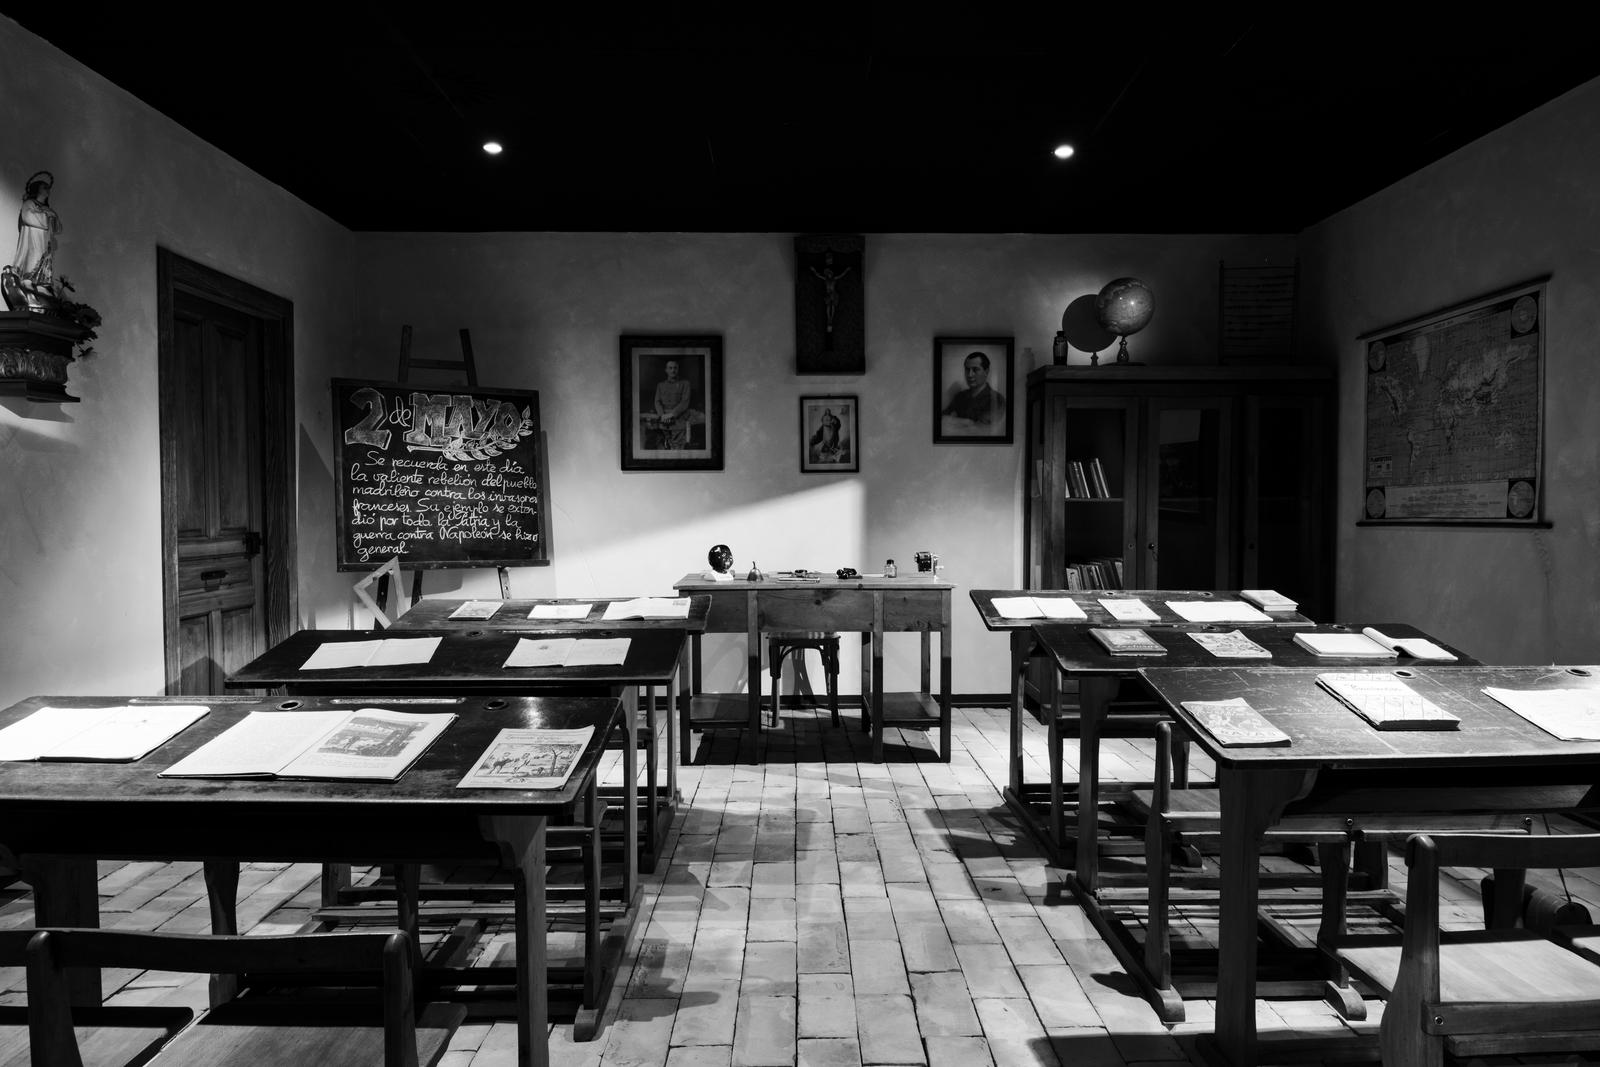 An old school classroom in black and white